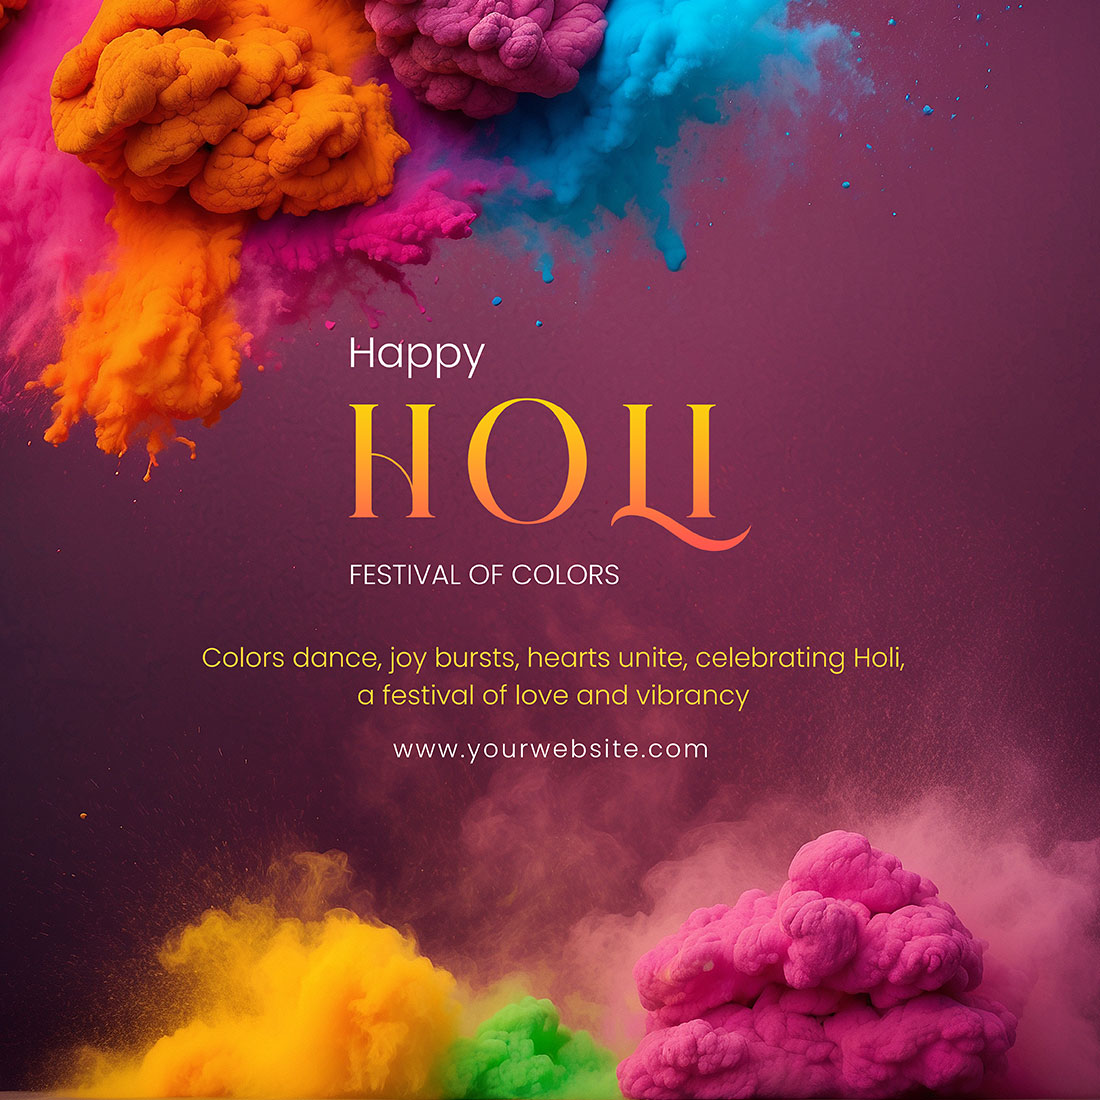 Concept of the Holi festival preview image.